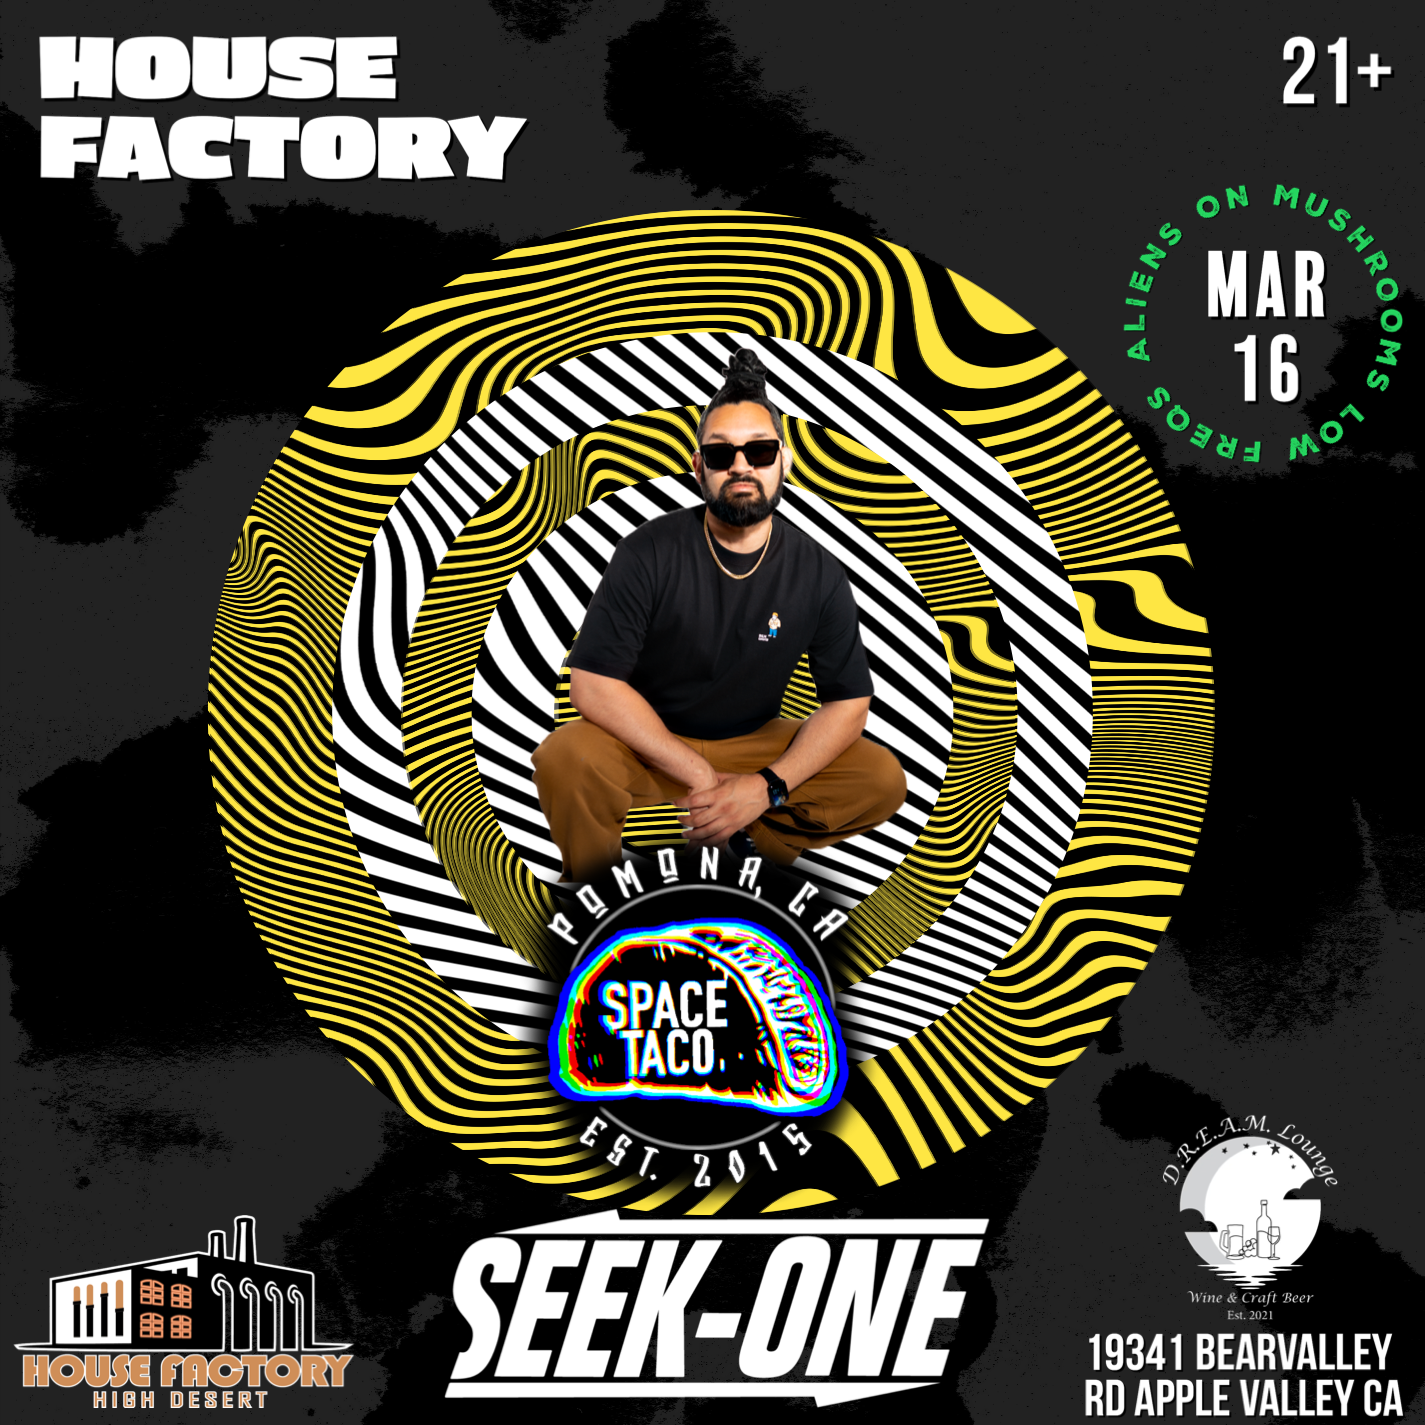 [CANCELLED] House Factory feat Seek-One - フライヤー表